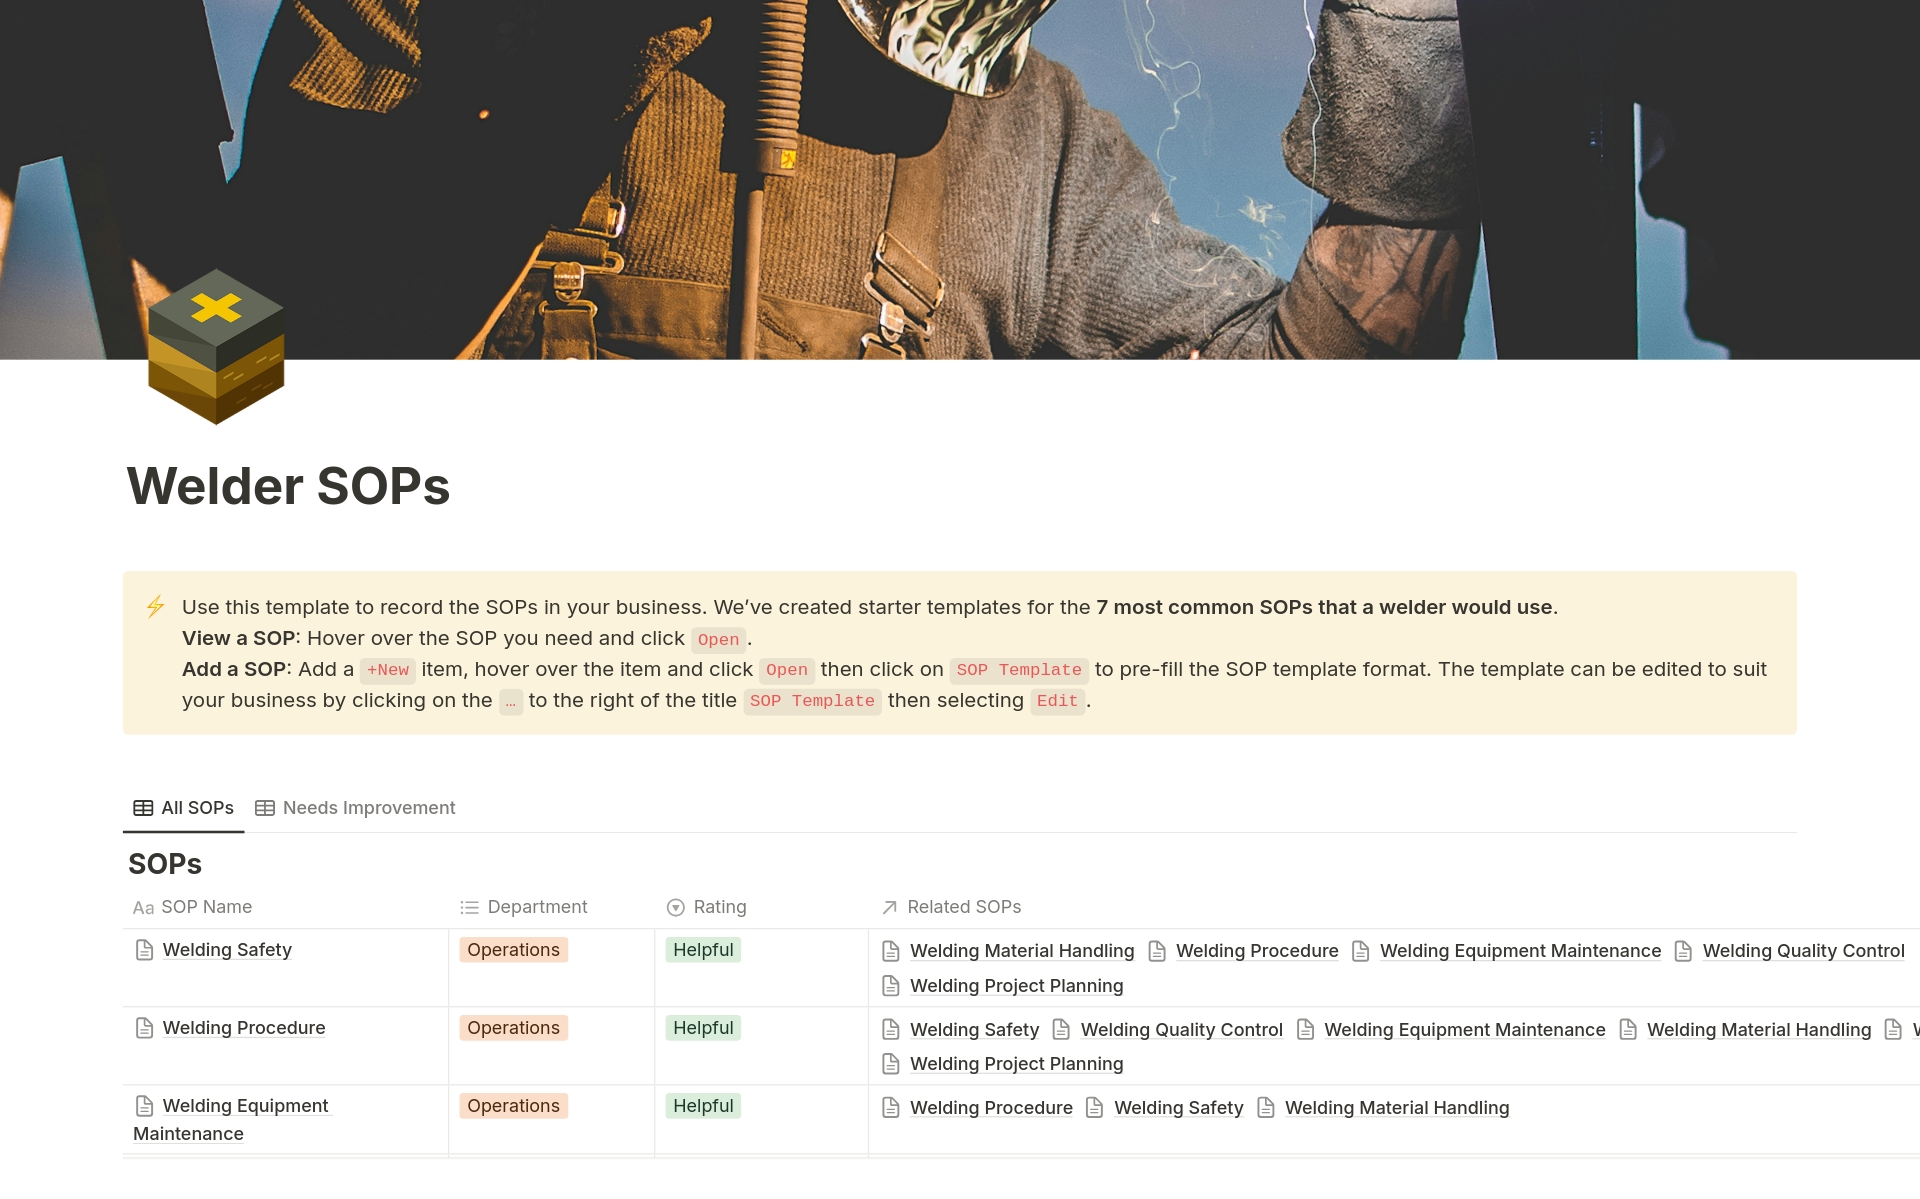 This template contains Standard Operating Procedures (SOPs) for welding activities within an organization. Includes 20+ pages of best practice SOPs to save you 10+ hours of research.